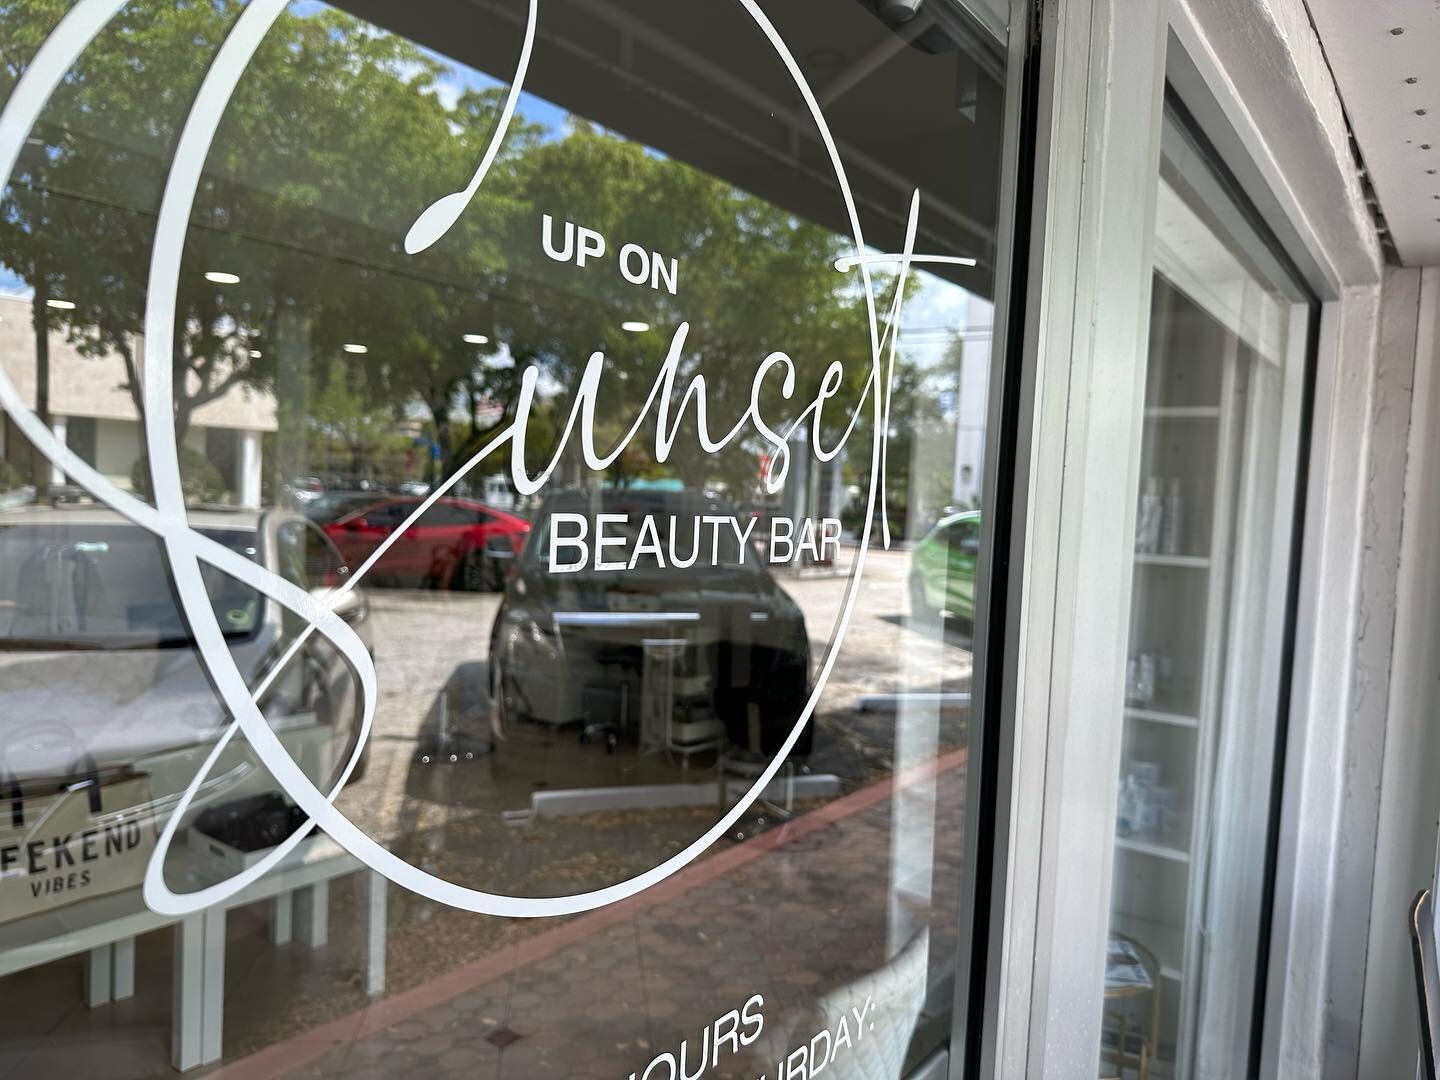 Welcoming the team of Up on Sunset Beauty Bar to our family